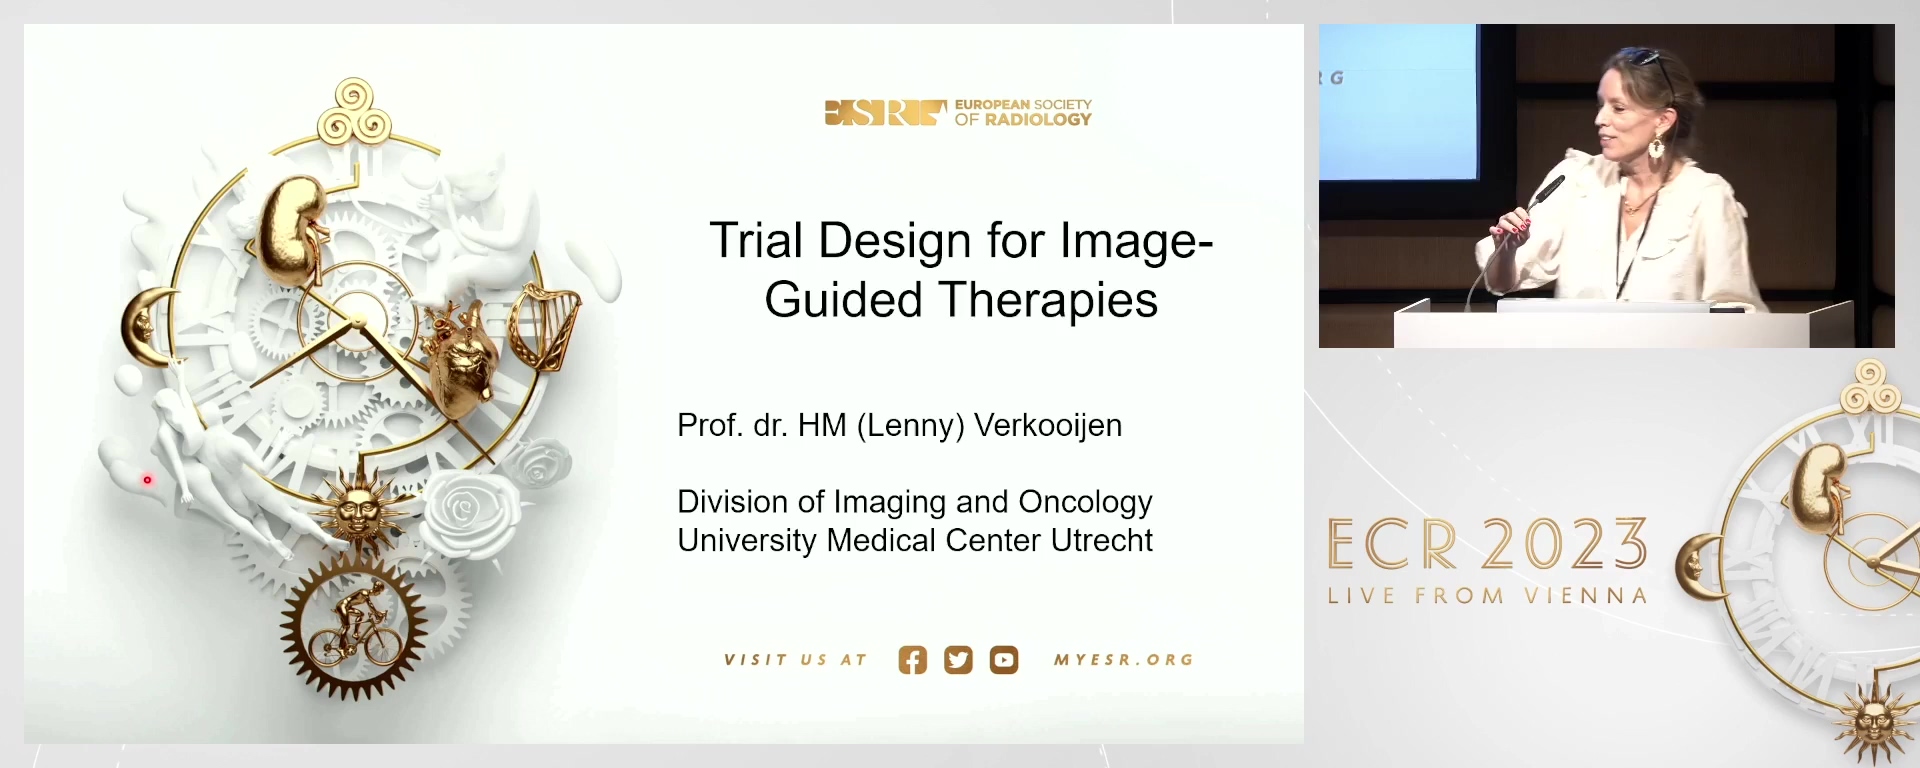 Trial design for image-guided therapies